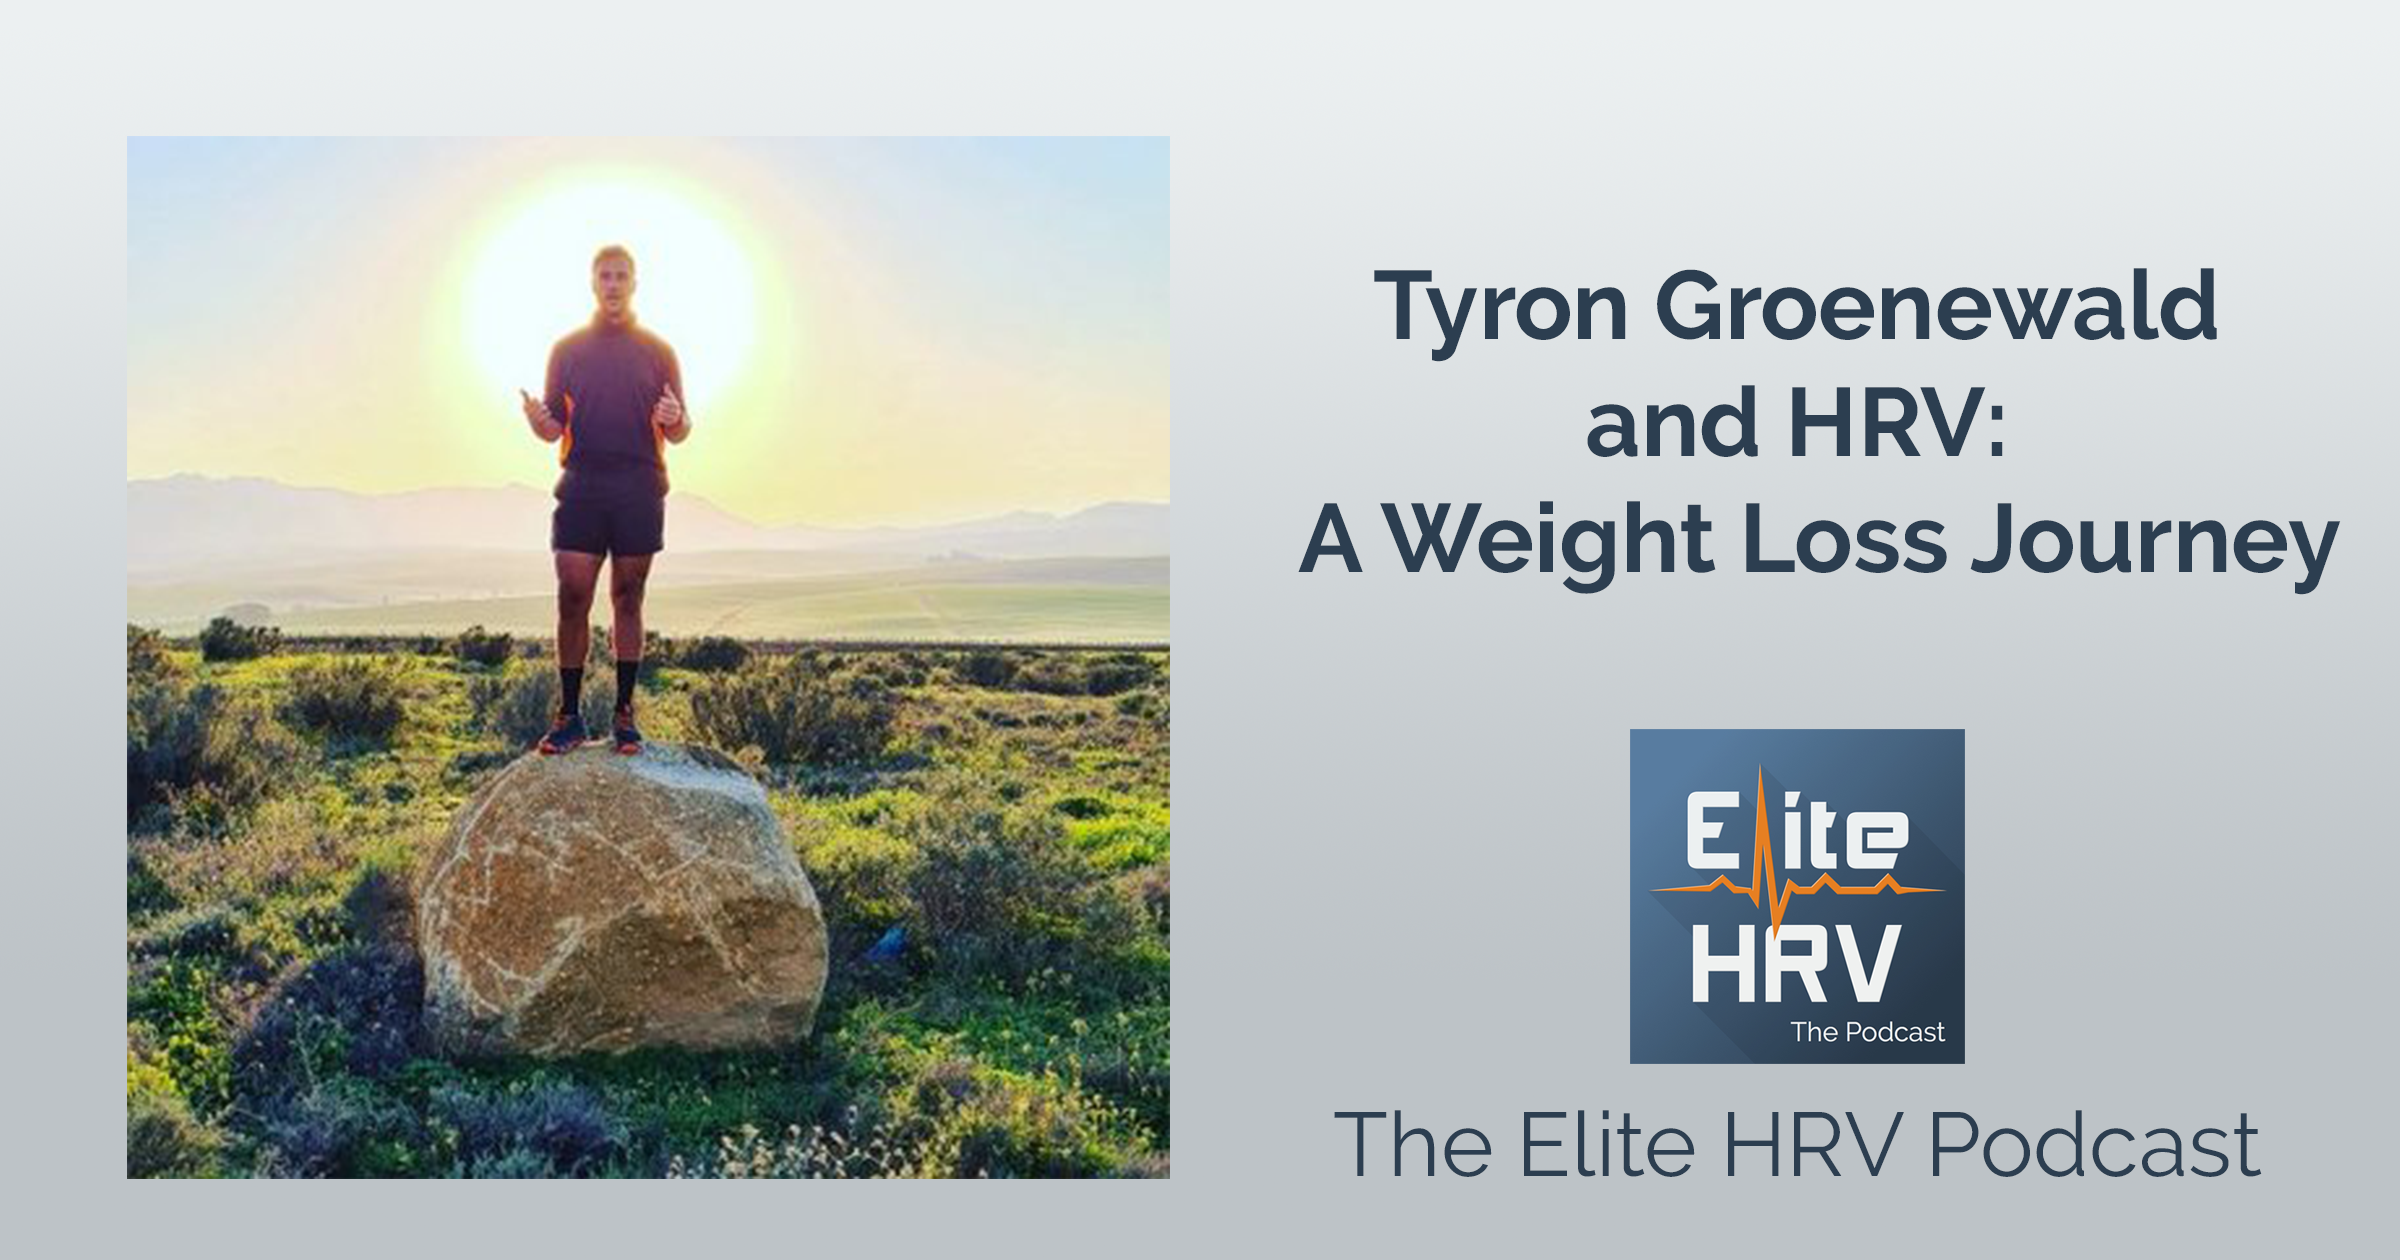 Tyron Groenewald and HRV: A Weight Loss Journey